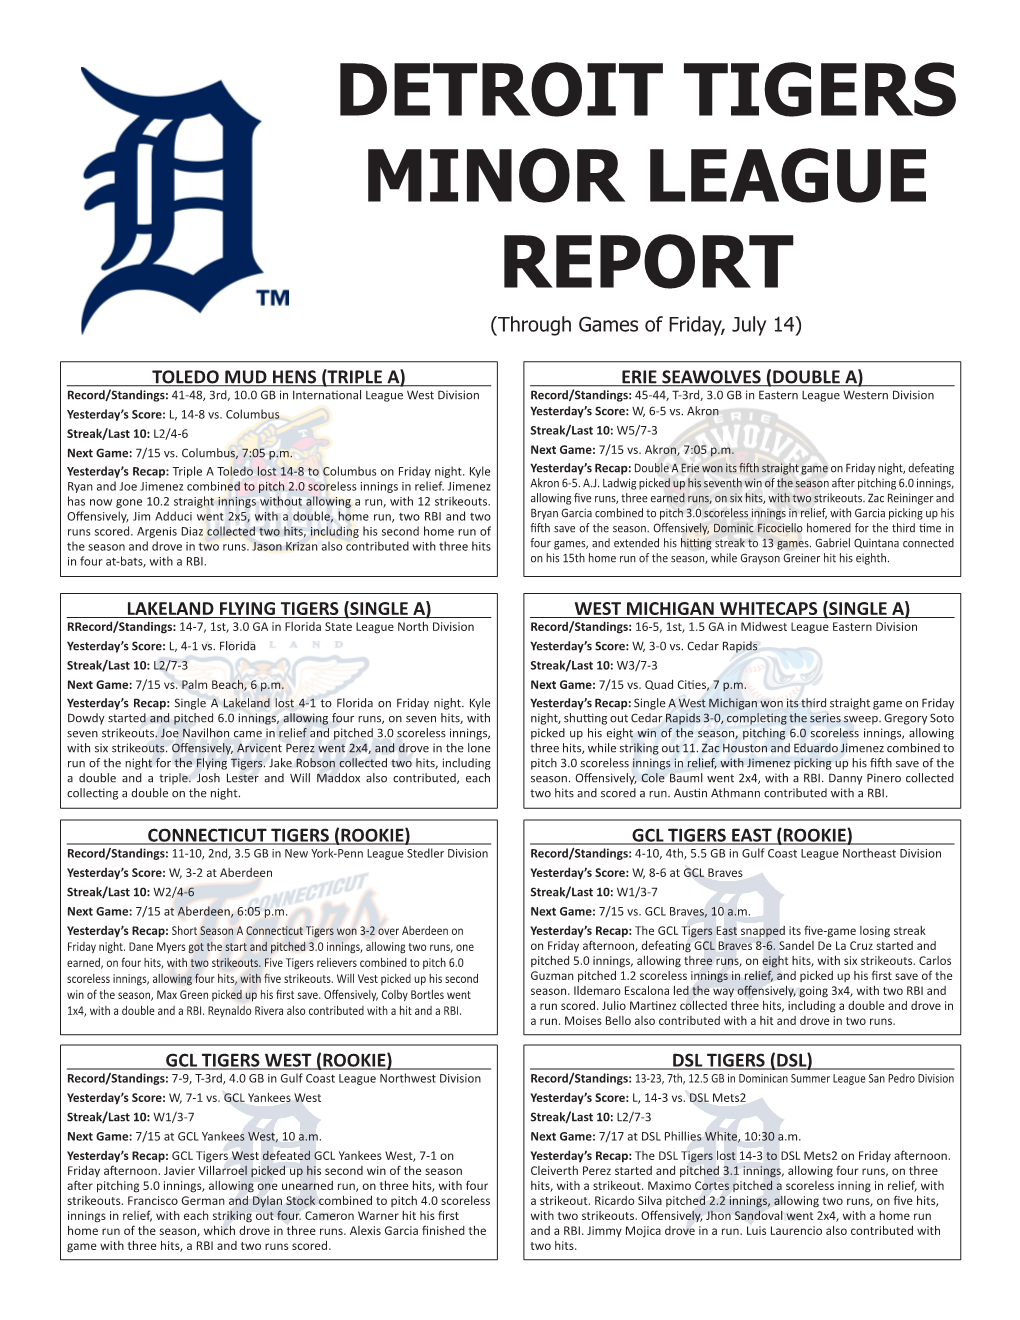 DETROIT TIGERS MINOR LEAGUE REPORT (Through Games of Friday, July 14)